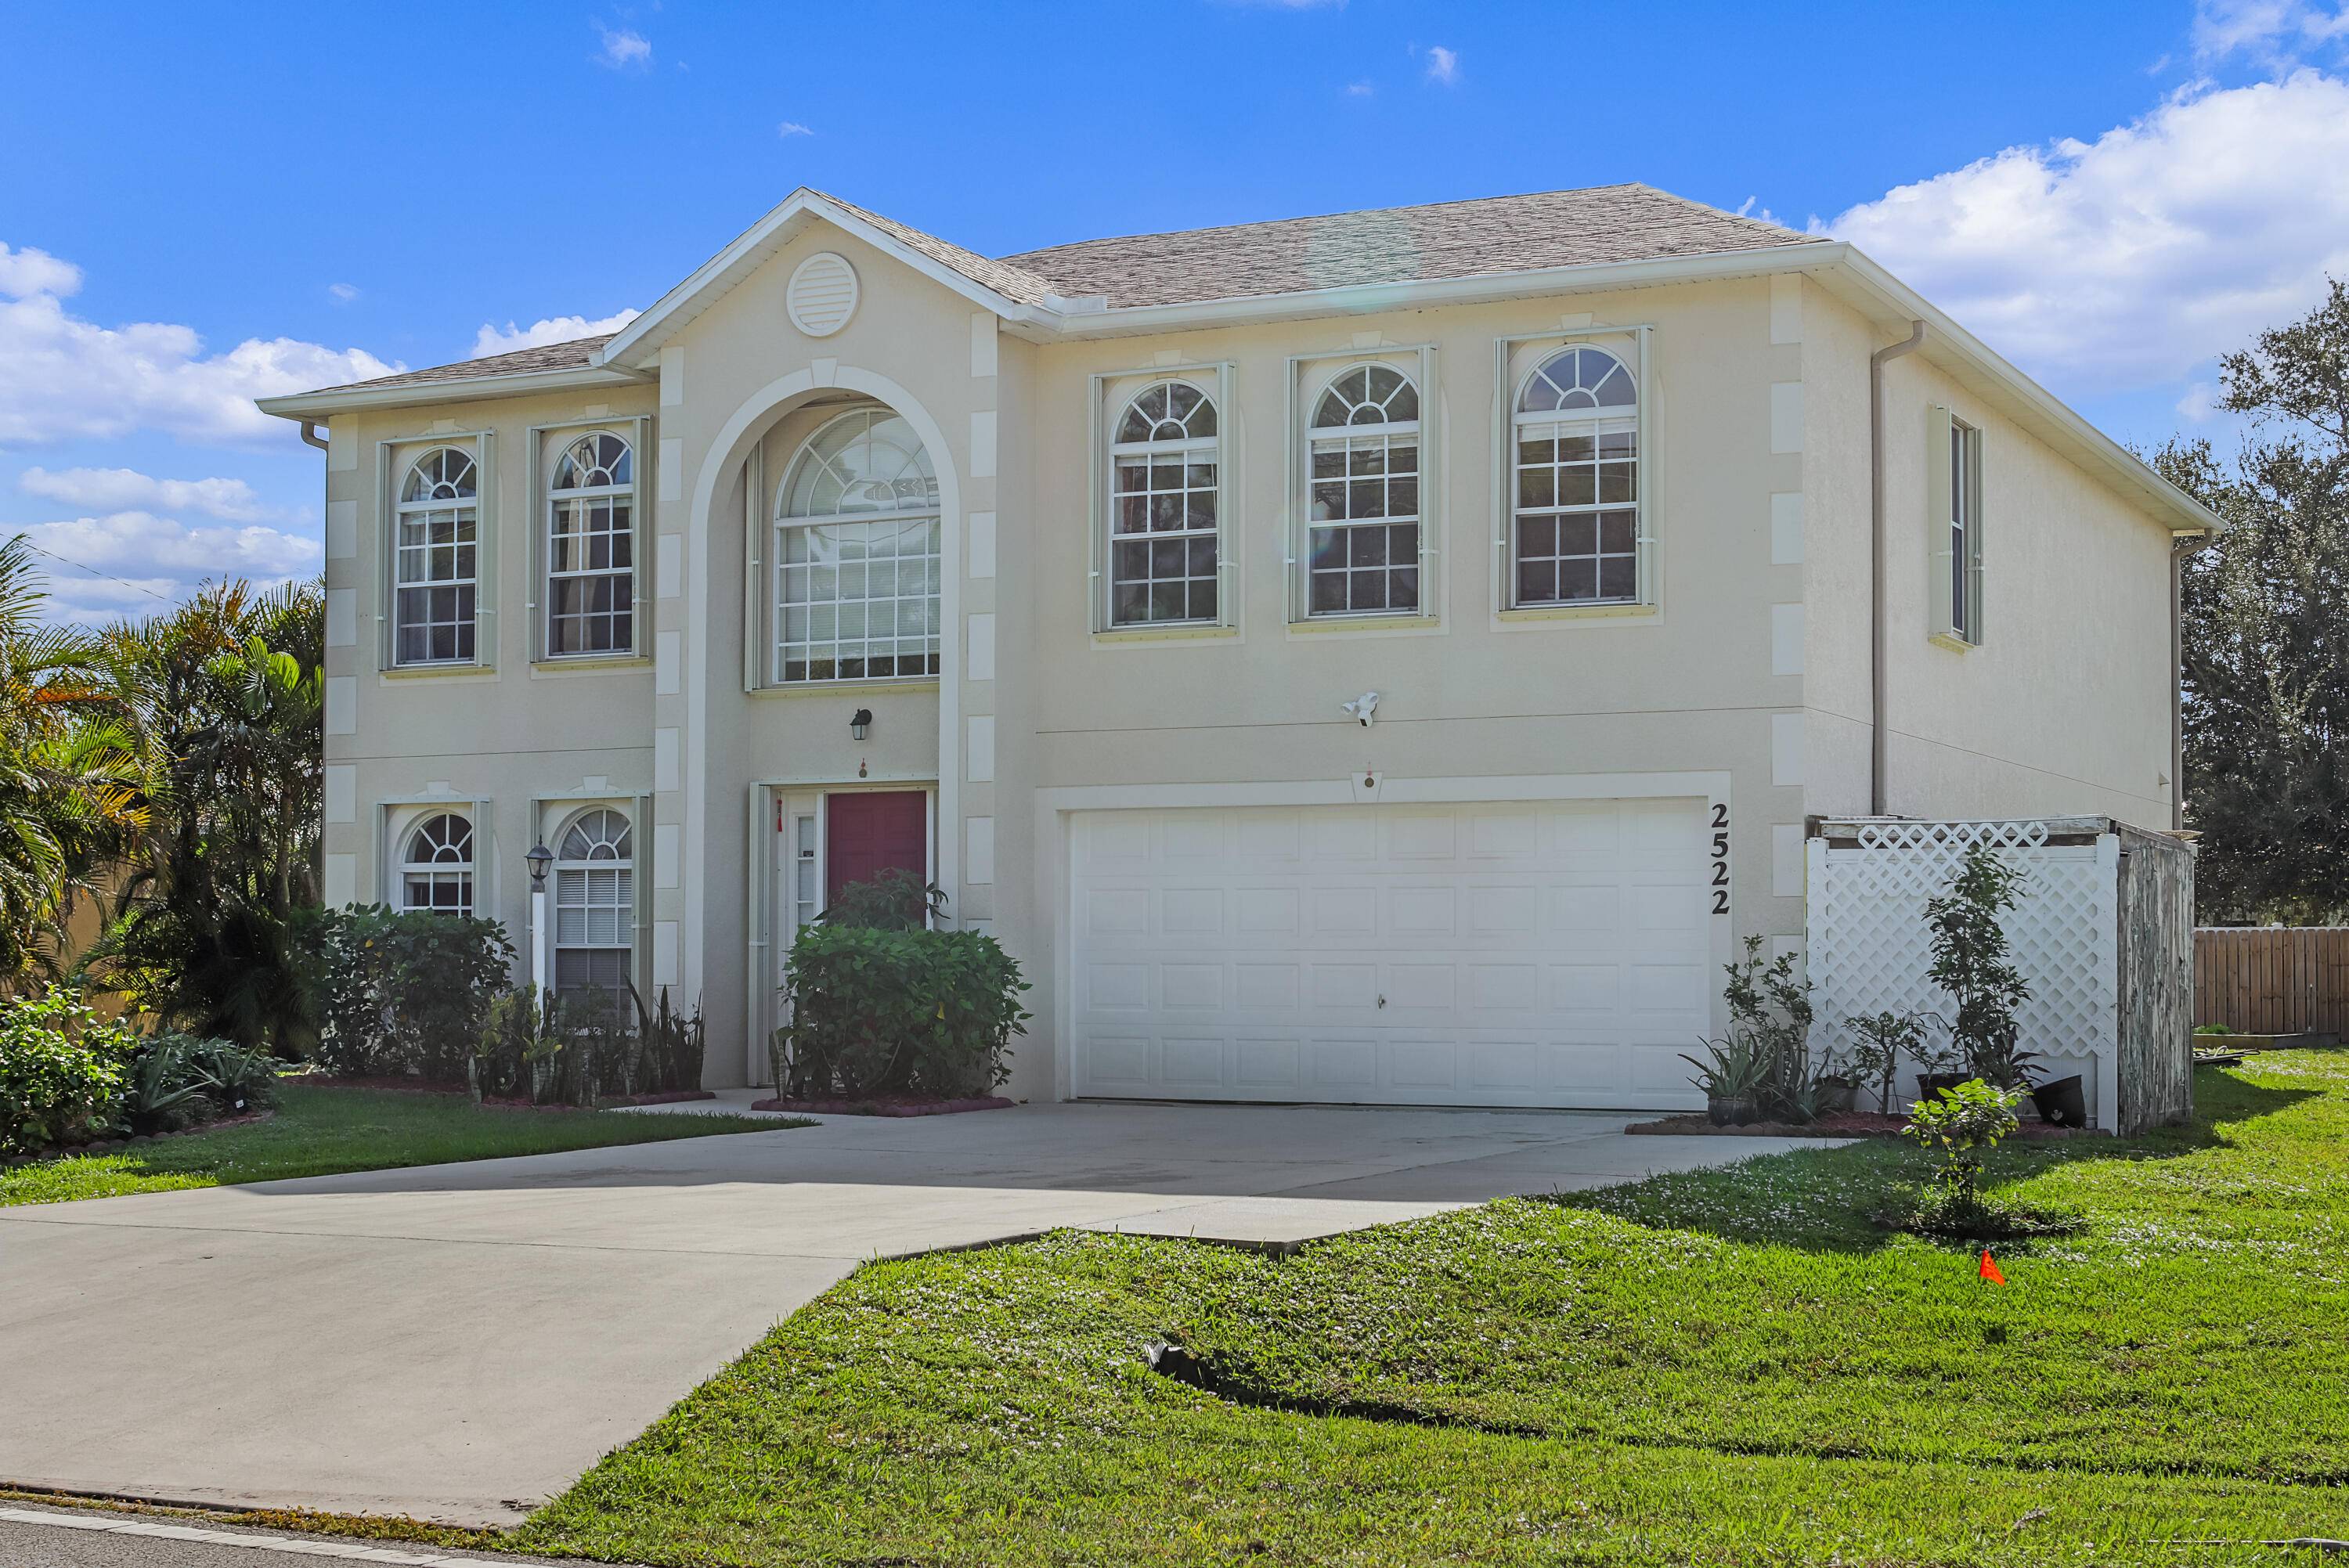 WOW ! ! ! Check out this nice home with 5 bedroom, 3 Bath, 2 story house with 2 car garage located east of us1 in Port Saint Lucie.